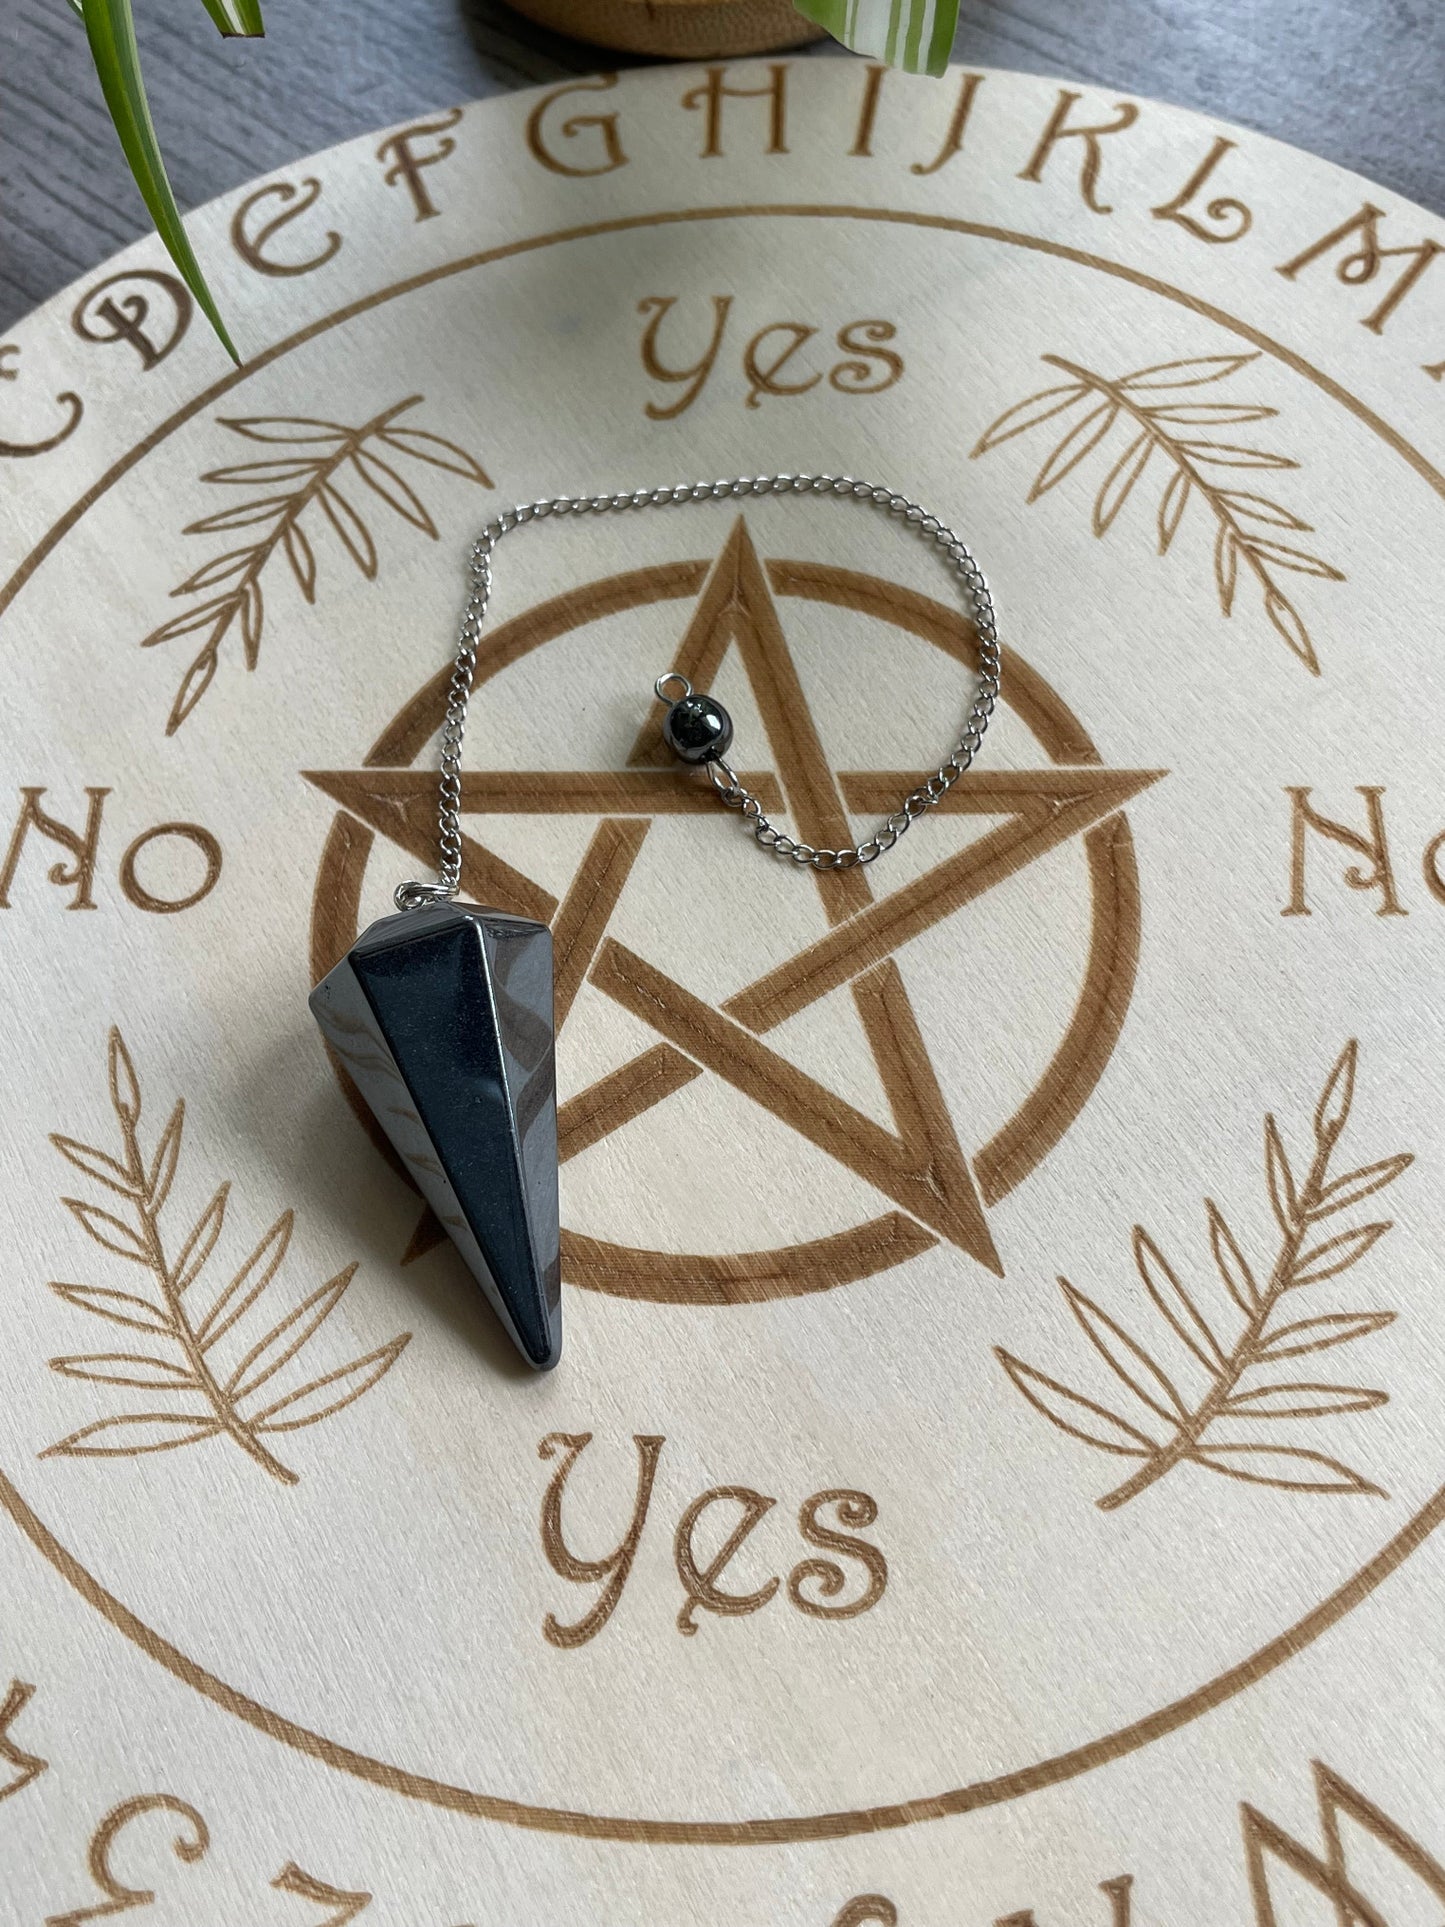 A hematite crystal pendulum sits atop a wooden divination board.